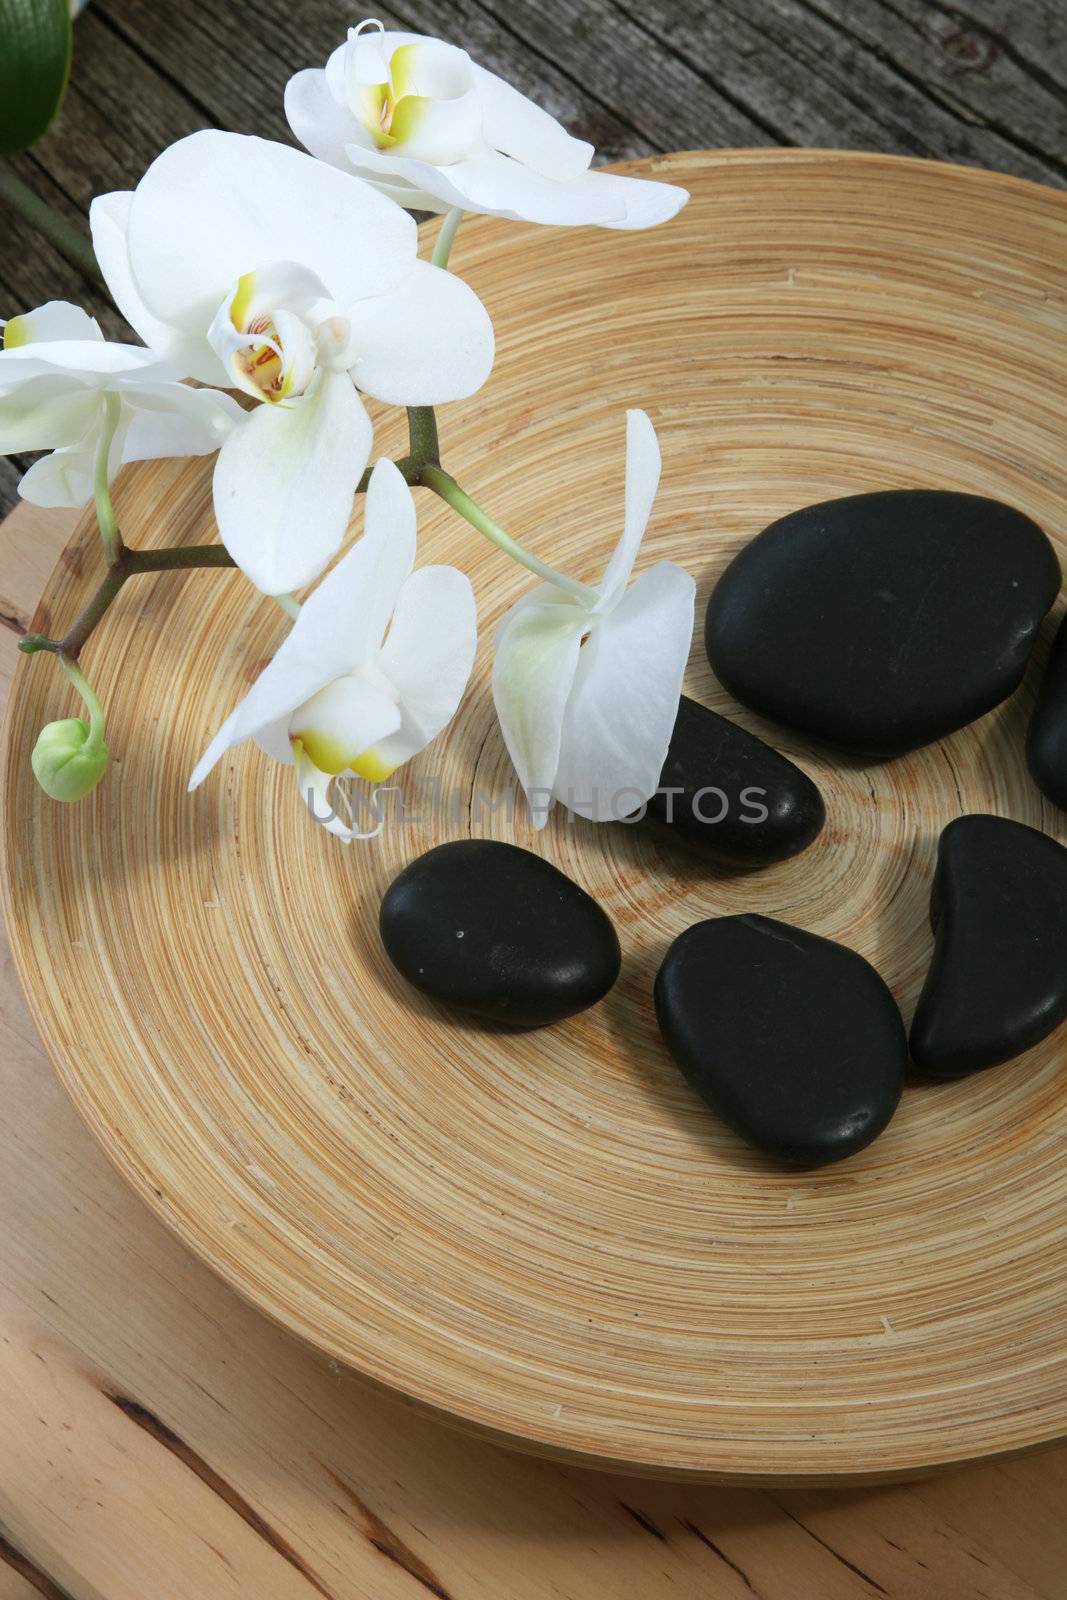 Spa massage stones and orchids by Farina6000